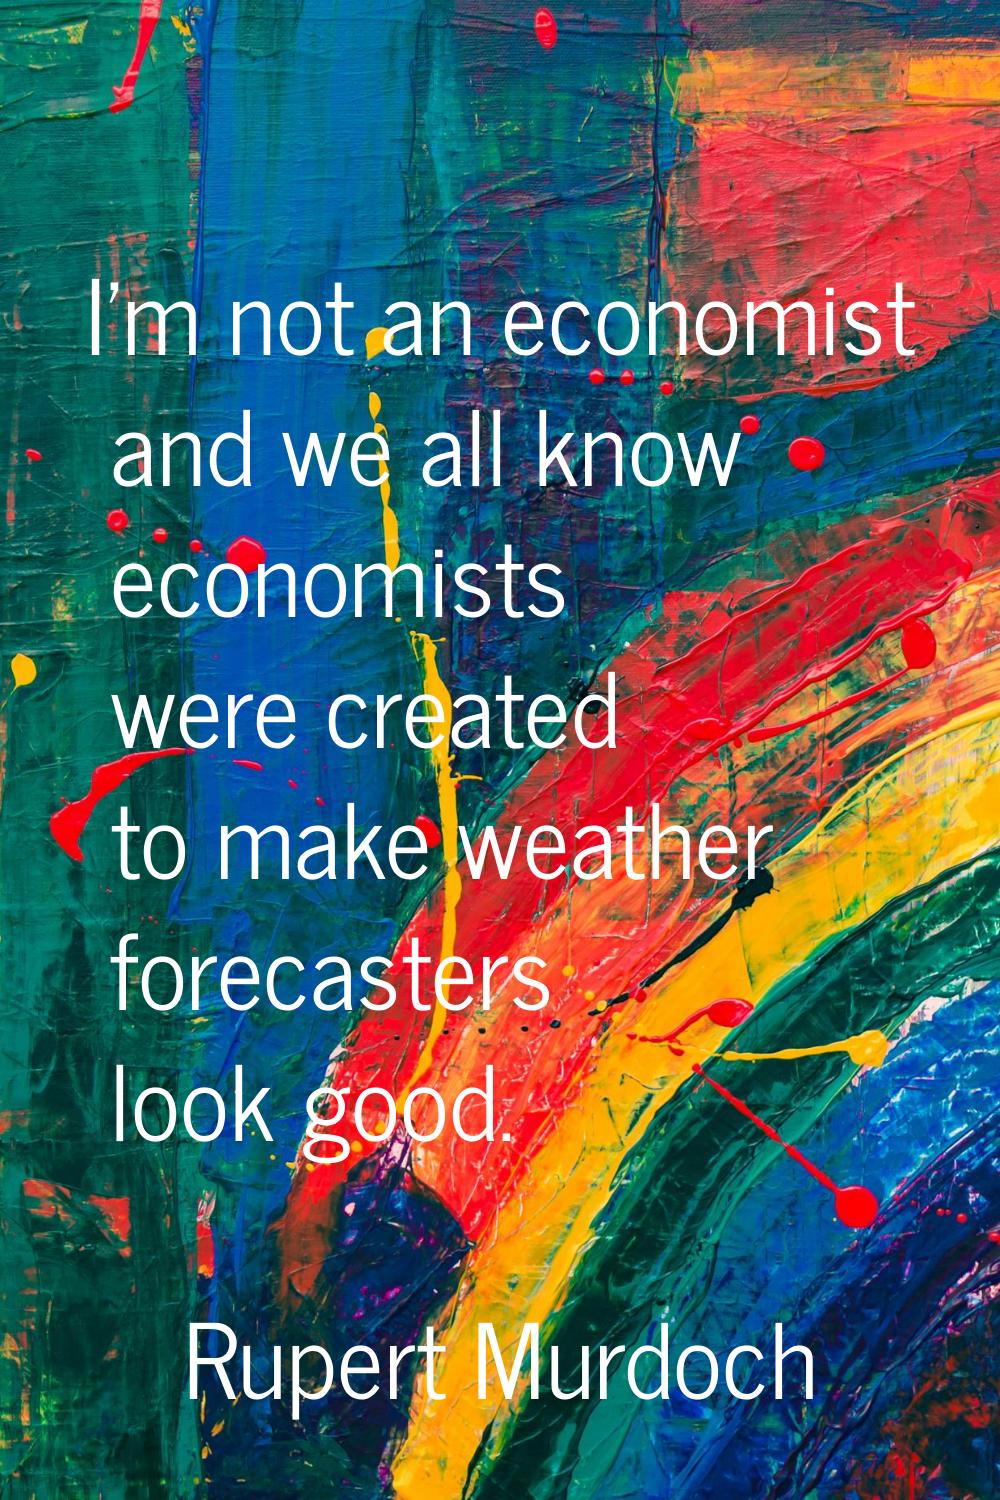 I'm not an economist and we all know economists were created to make weather forecasters look good.